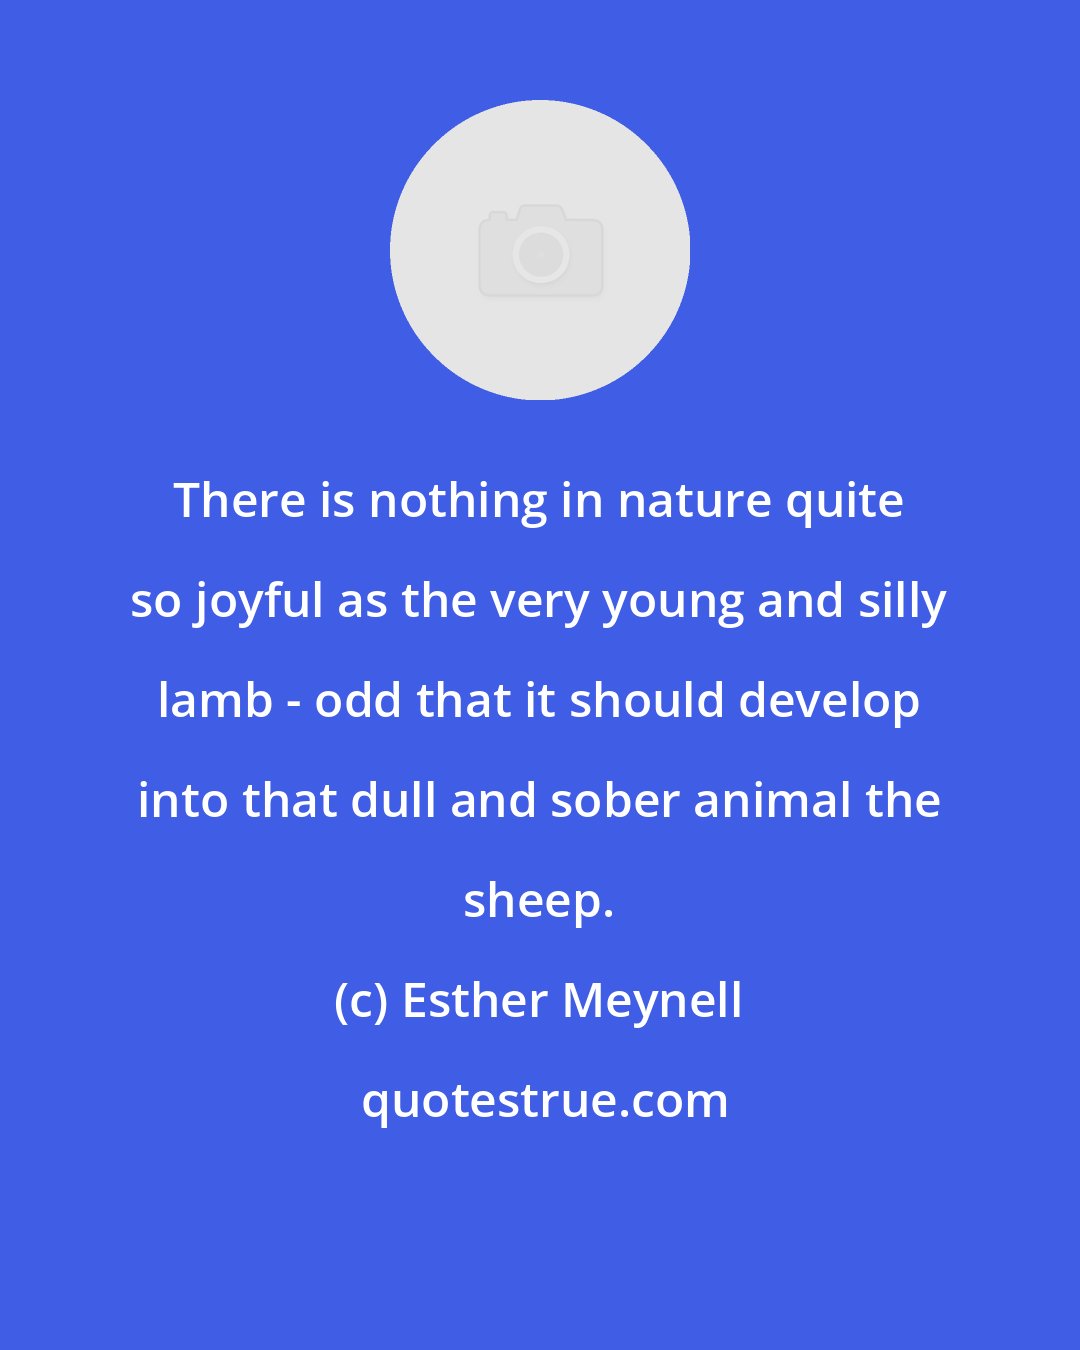 Esther Meynell: There is nothing in nature quite so joyful as the very young and silly lamb - odd that it should develop into that dull and sober animal the sheep.